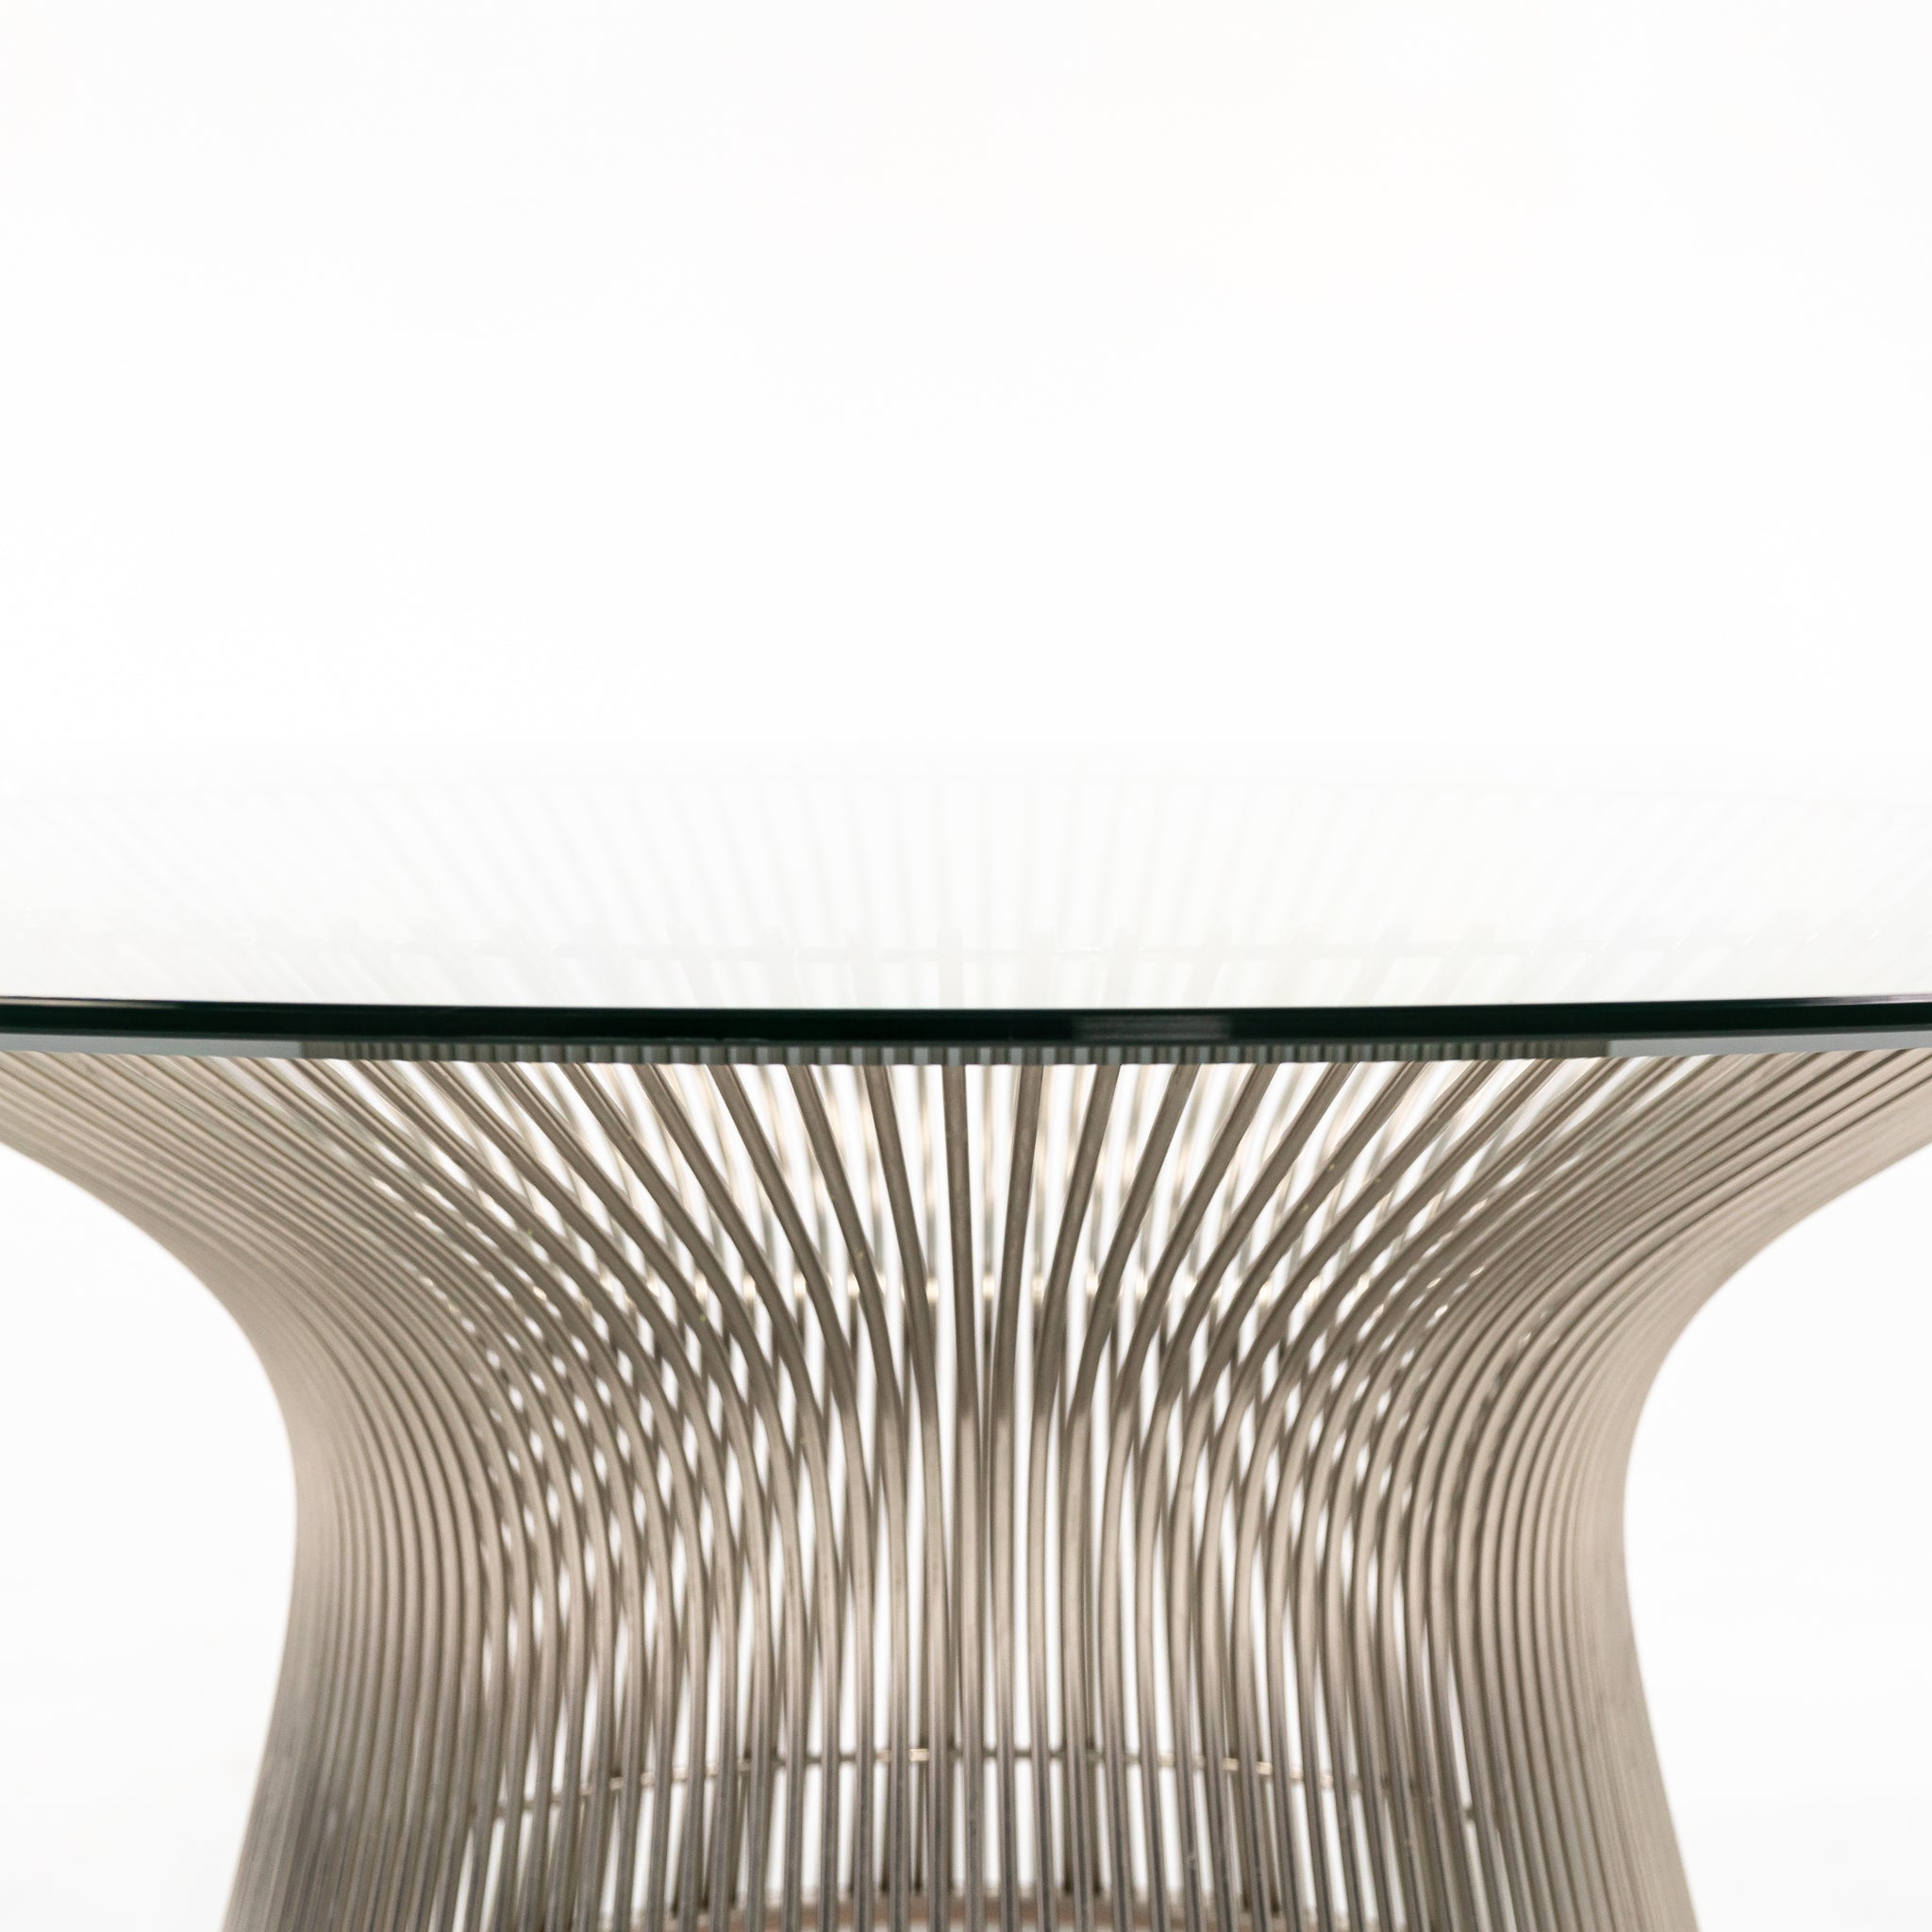 2000s Platner 42 in Coffee Table 3714T by Warren Platner for Knoll in Polished Nickel with Clear Glass